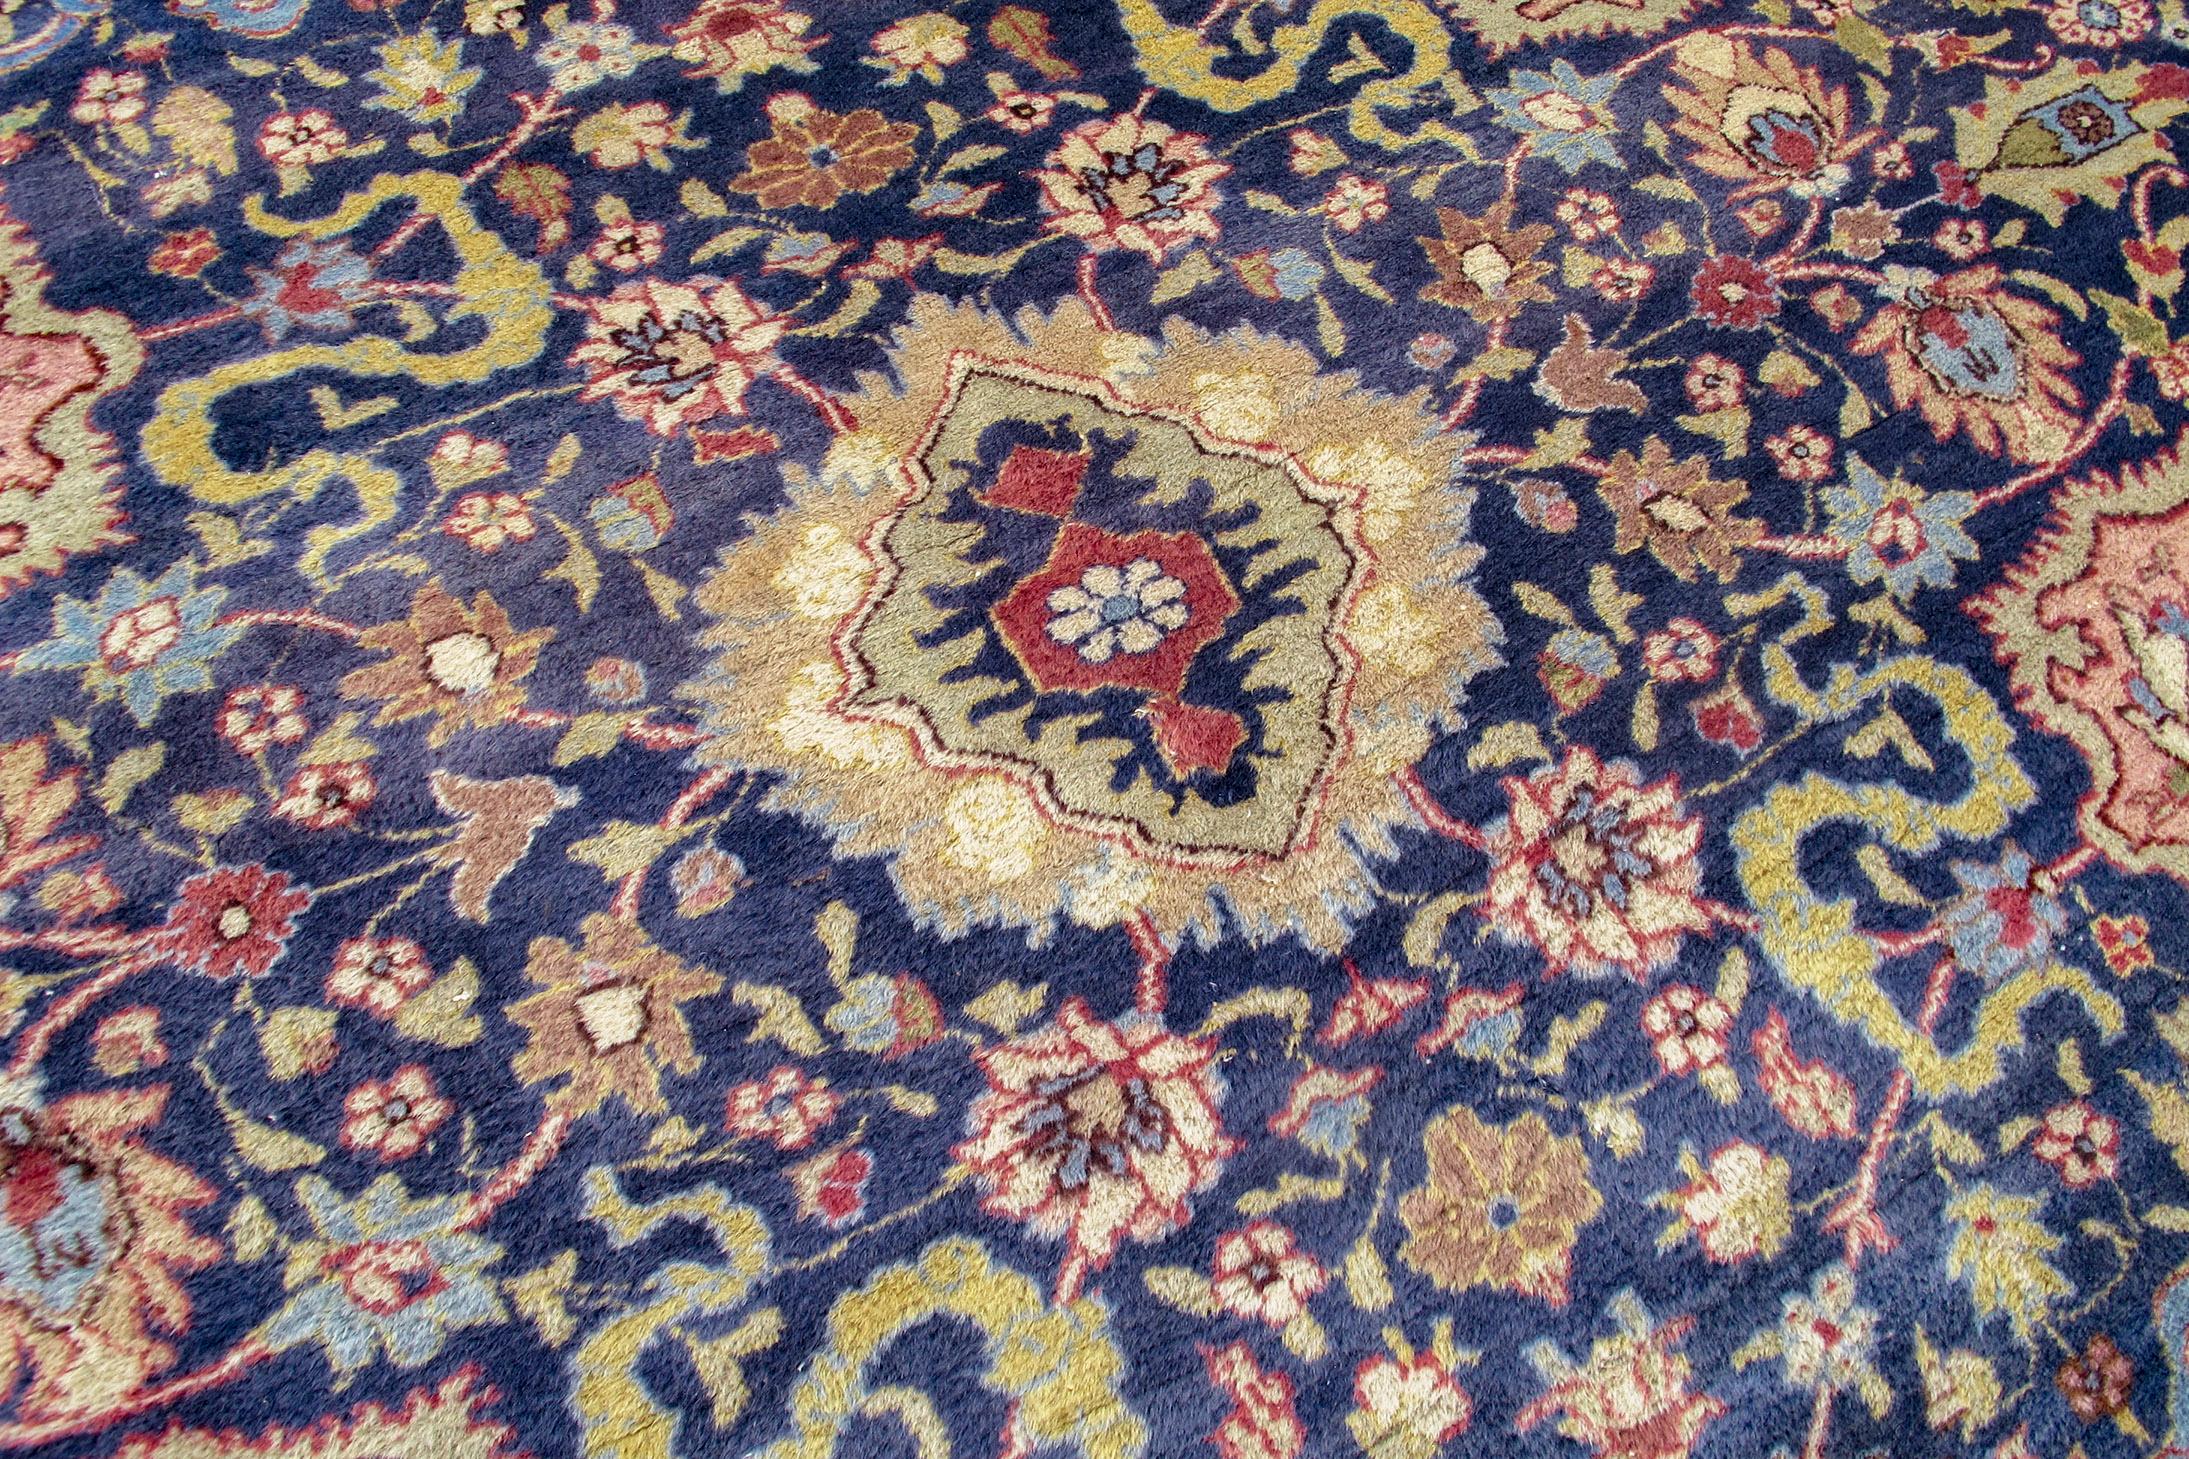 Hand-Woven Antique Persian Hereke Carpet, c. 1900 For Sale